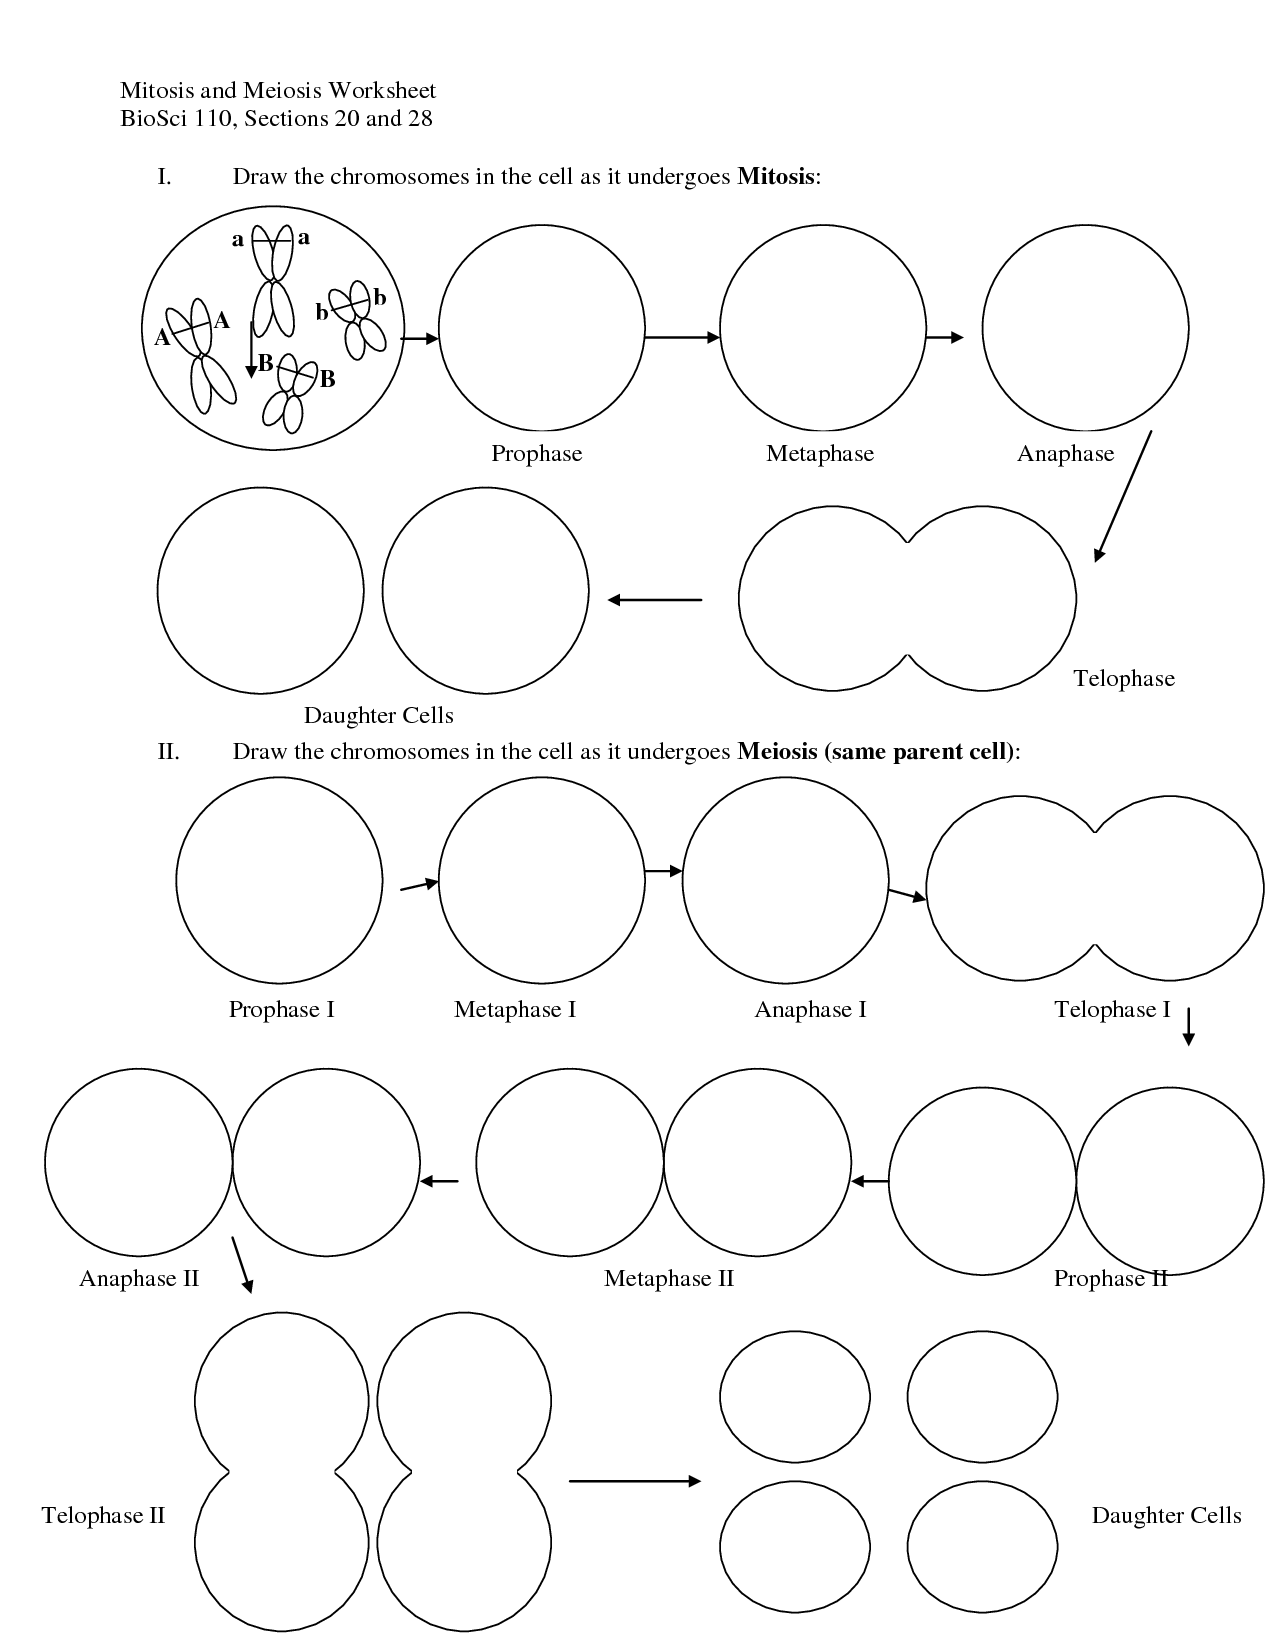 comparing-mitosis-and-meiosis-worksheet-answers-kamberlawgroup